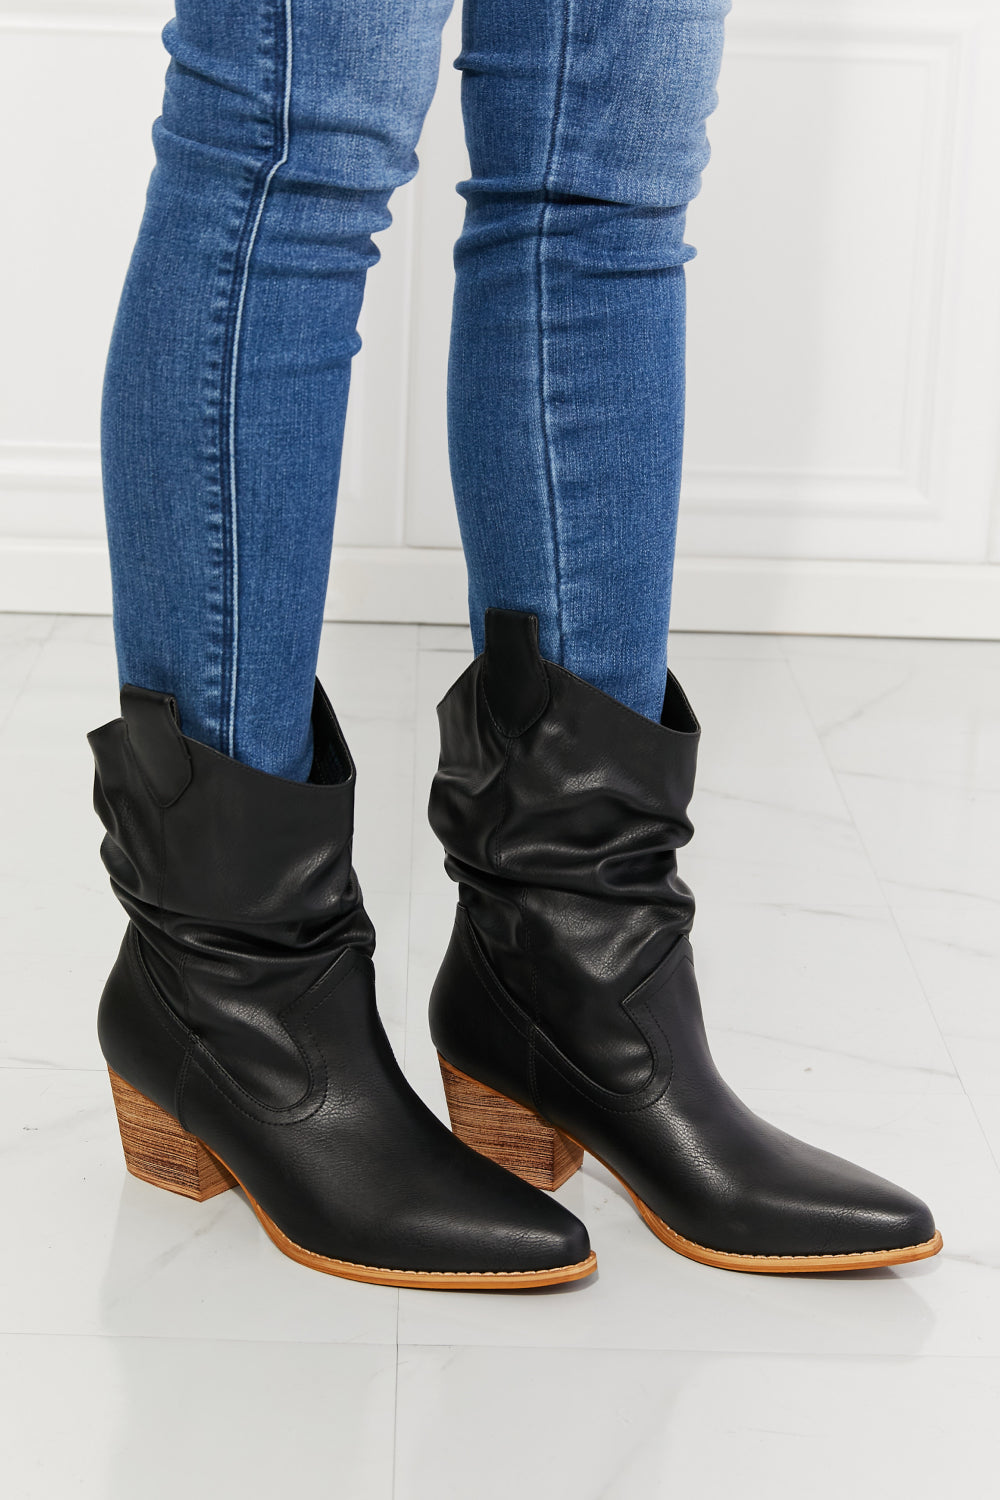 MMShoes Better in Texas Scrunch Cowboy Boots in Black - AllIn Computer